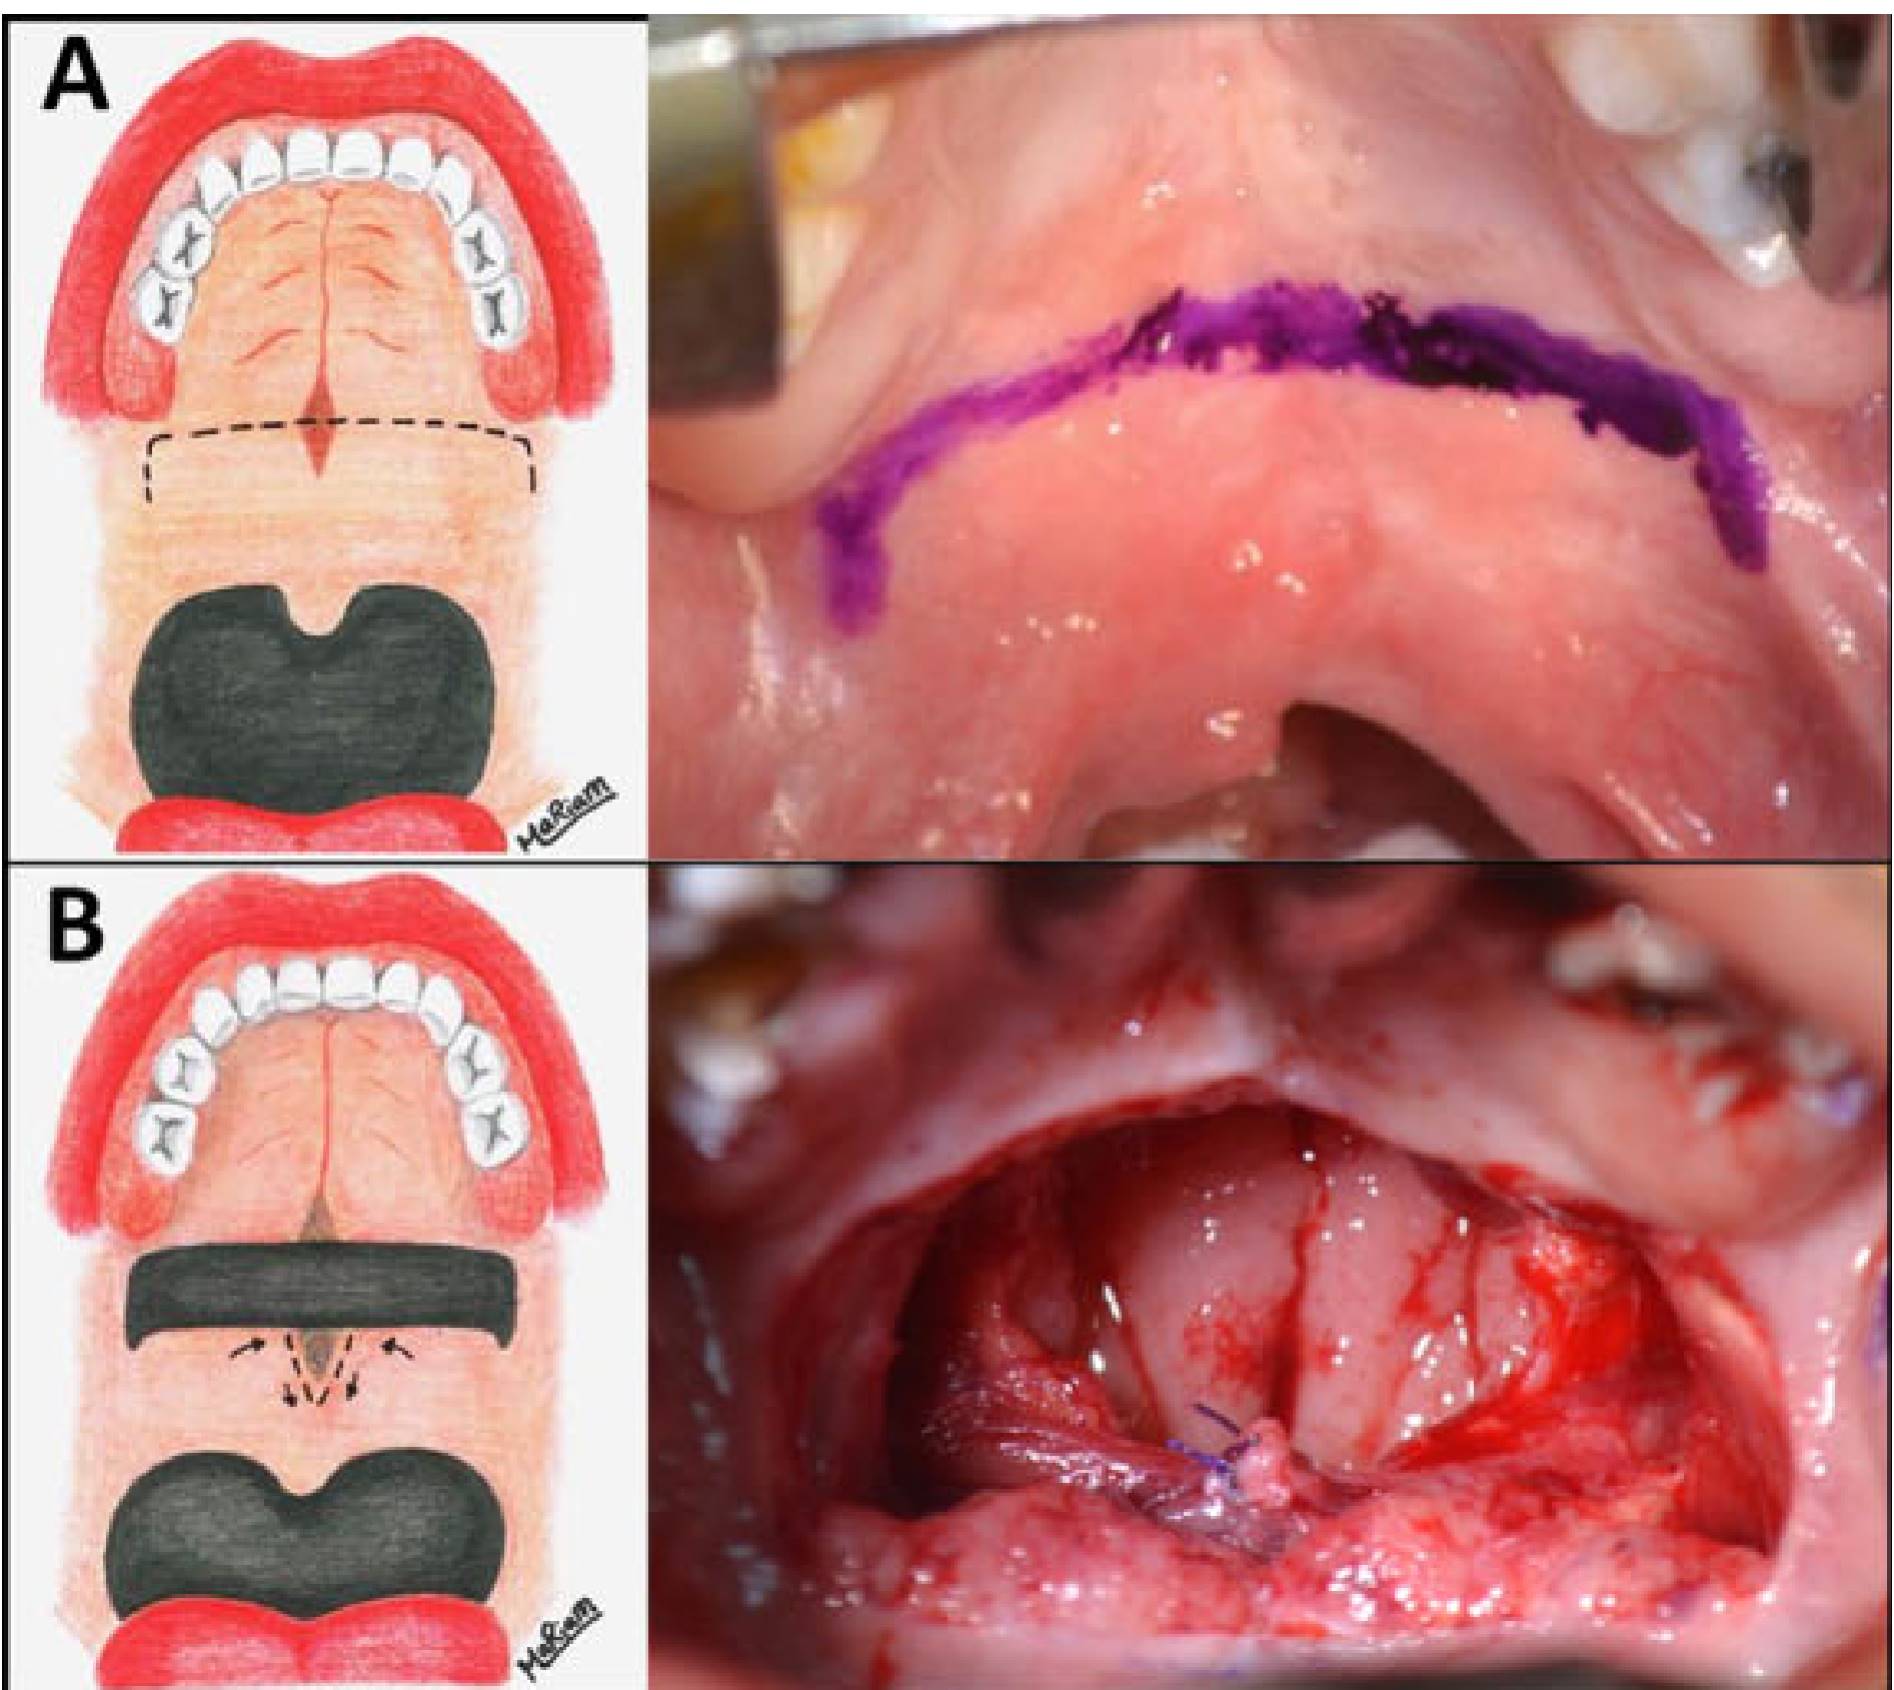 Buccinator Re-Repair (Bs + Re: IVVP): A Combined Procedure to Maximize the Palate Form and Function in Difficult VPI Cases.